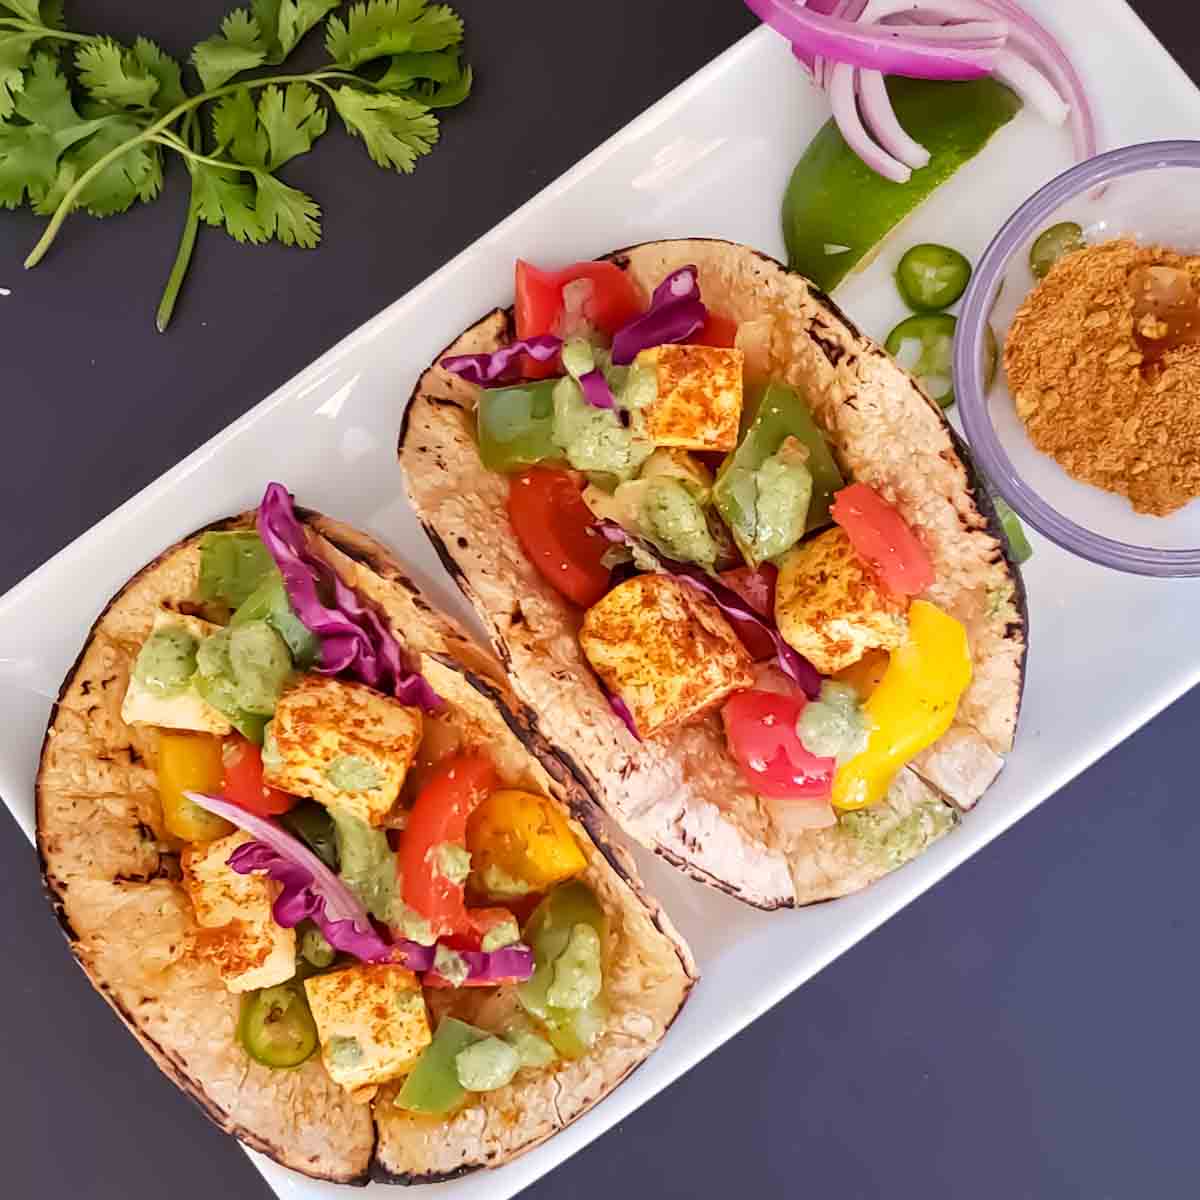 Paneer Fajita Tacos served with green sauce on white plate. This colorful recipe combines Indian Paneer with Mexican Taco seasoning making a lovely fusion.